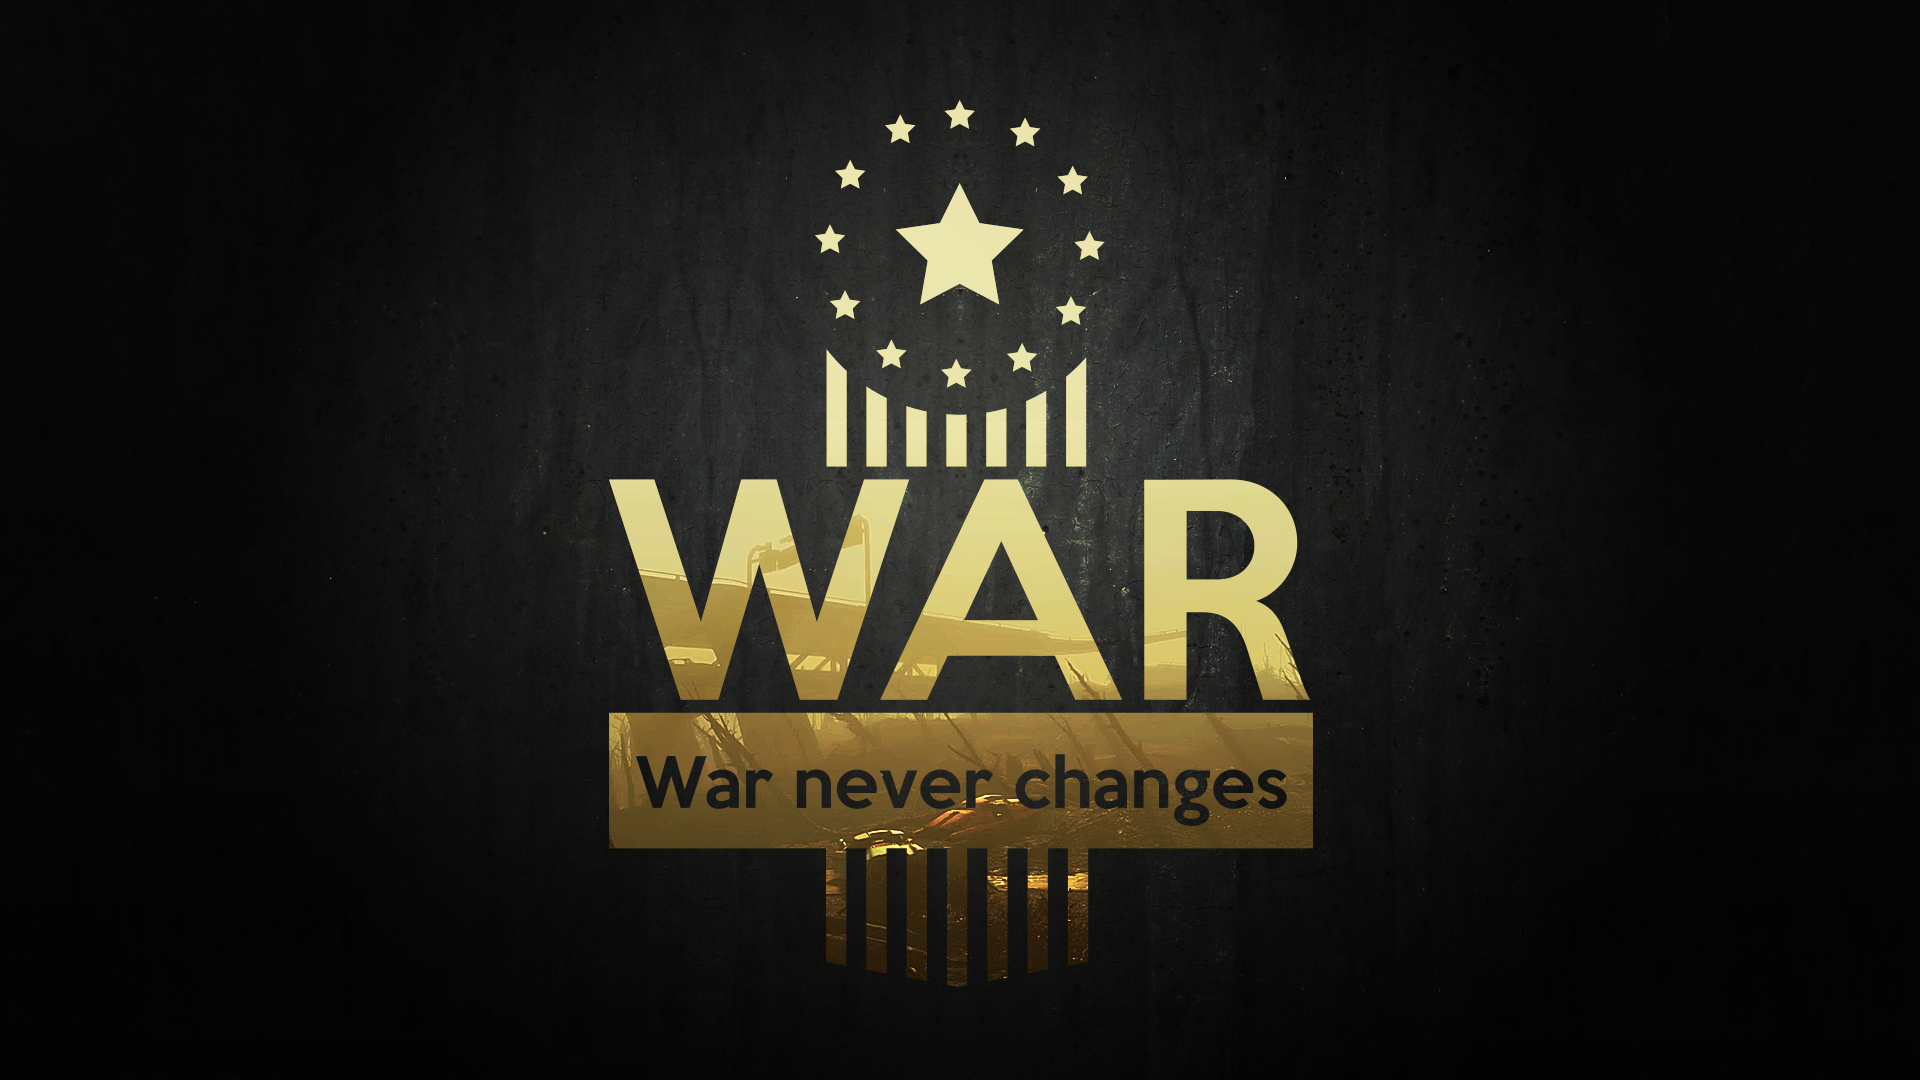 I made a War, War Never Changes background for you all!